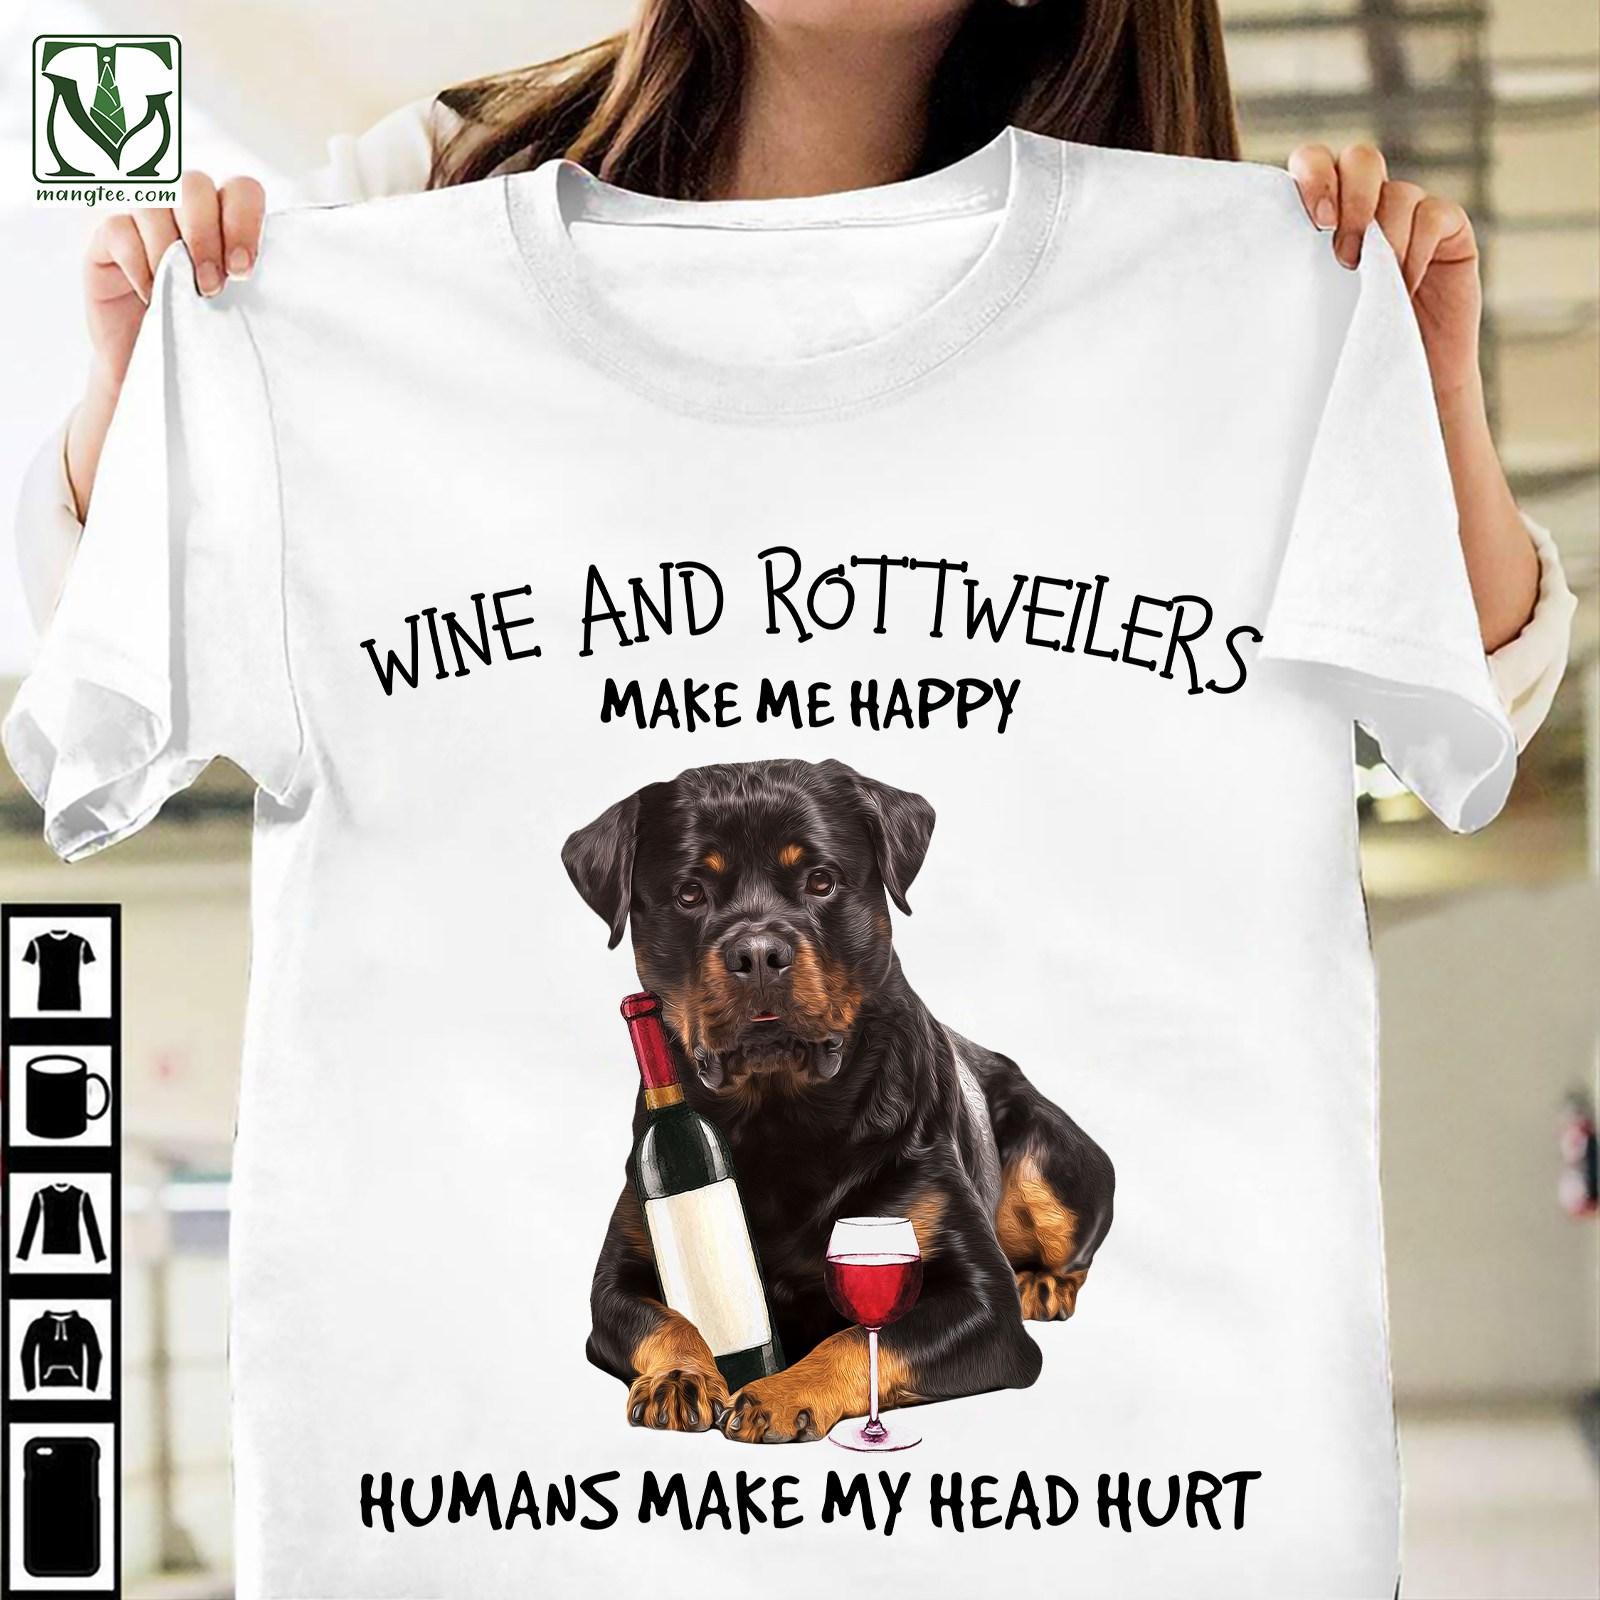 Wine and Rottweilers make me happy, humans make my head hurt - Rottweiler dog lover, wine and dog